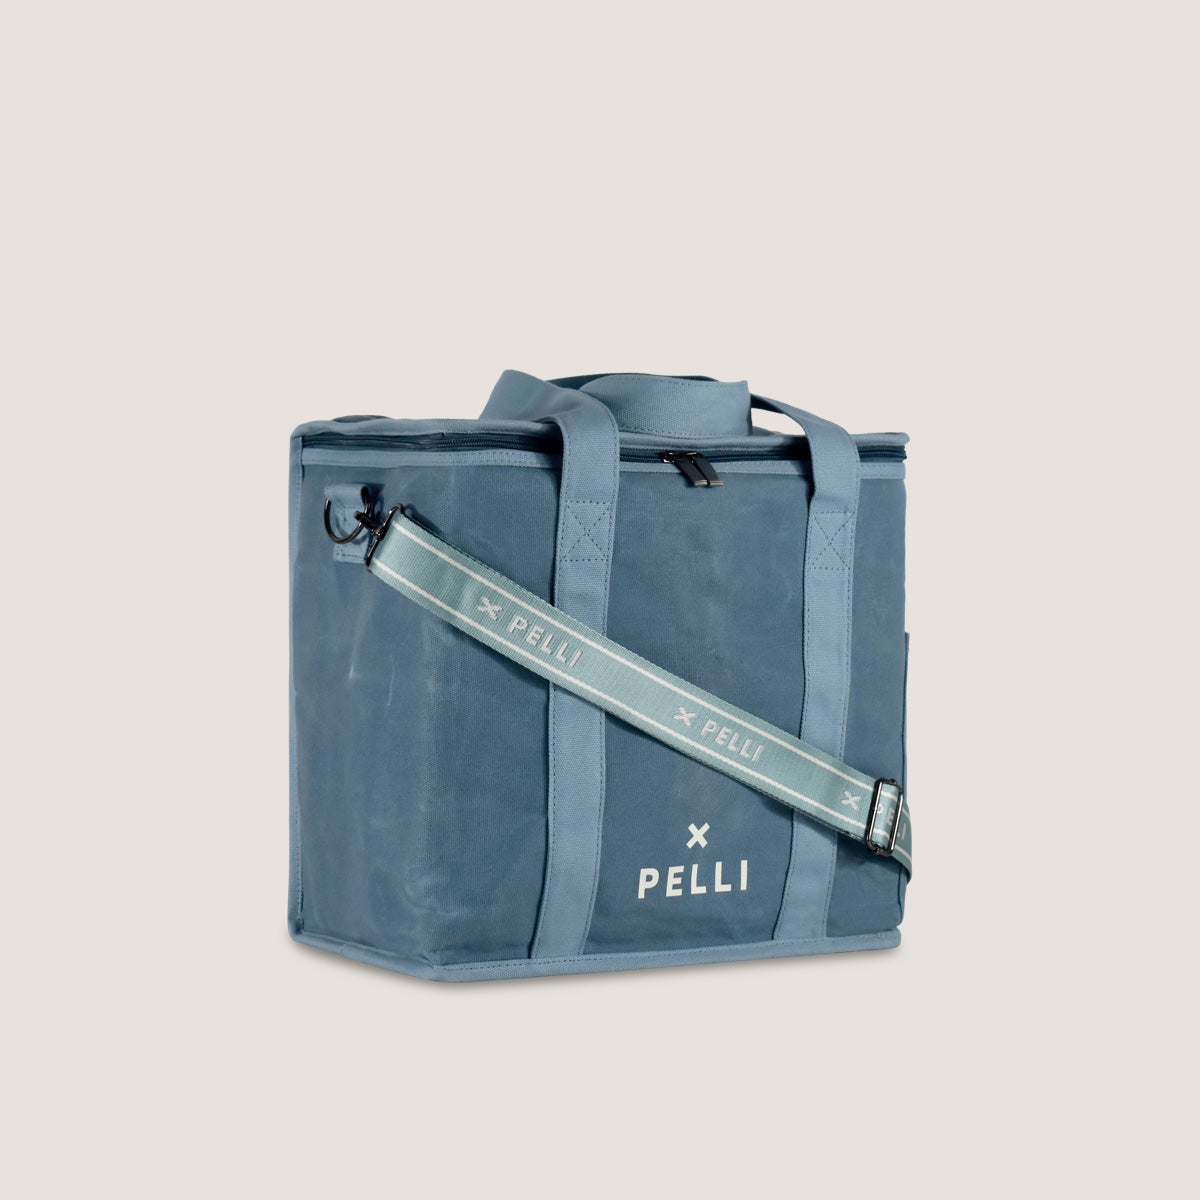 Load image into Gallery viewer, OK Chill Crossbody - Waxed Canvas Medium Cooler Bag with Shoulder Strap in Dusty Blue
